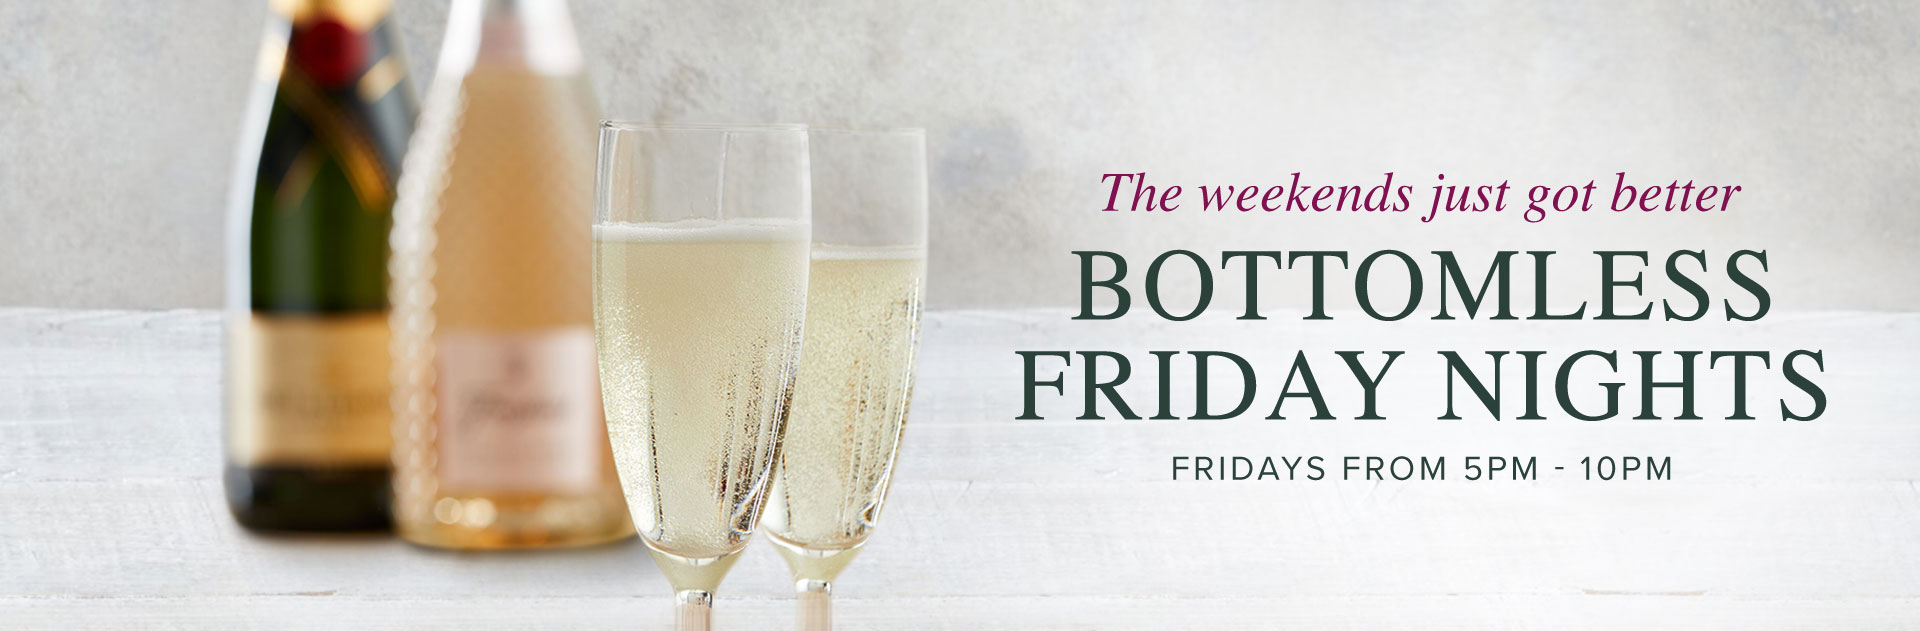 Bottomless Friday at The Anderton Arms